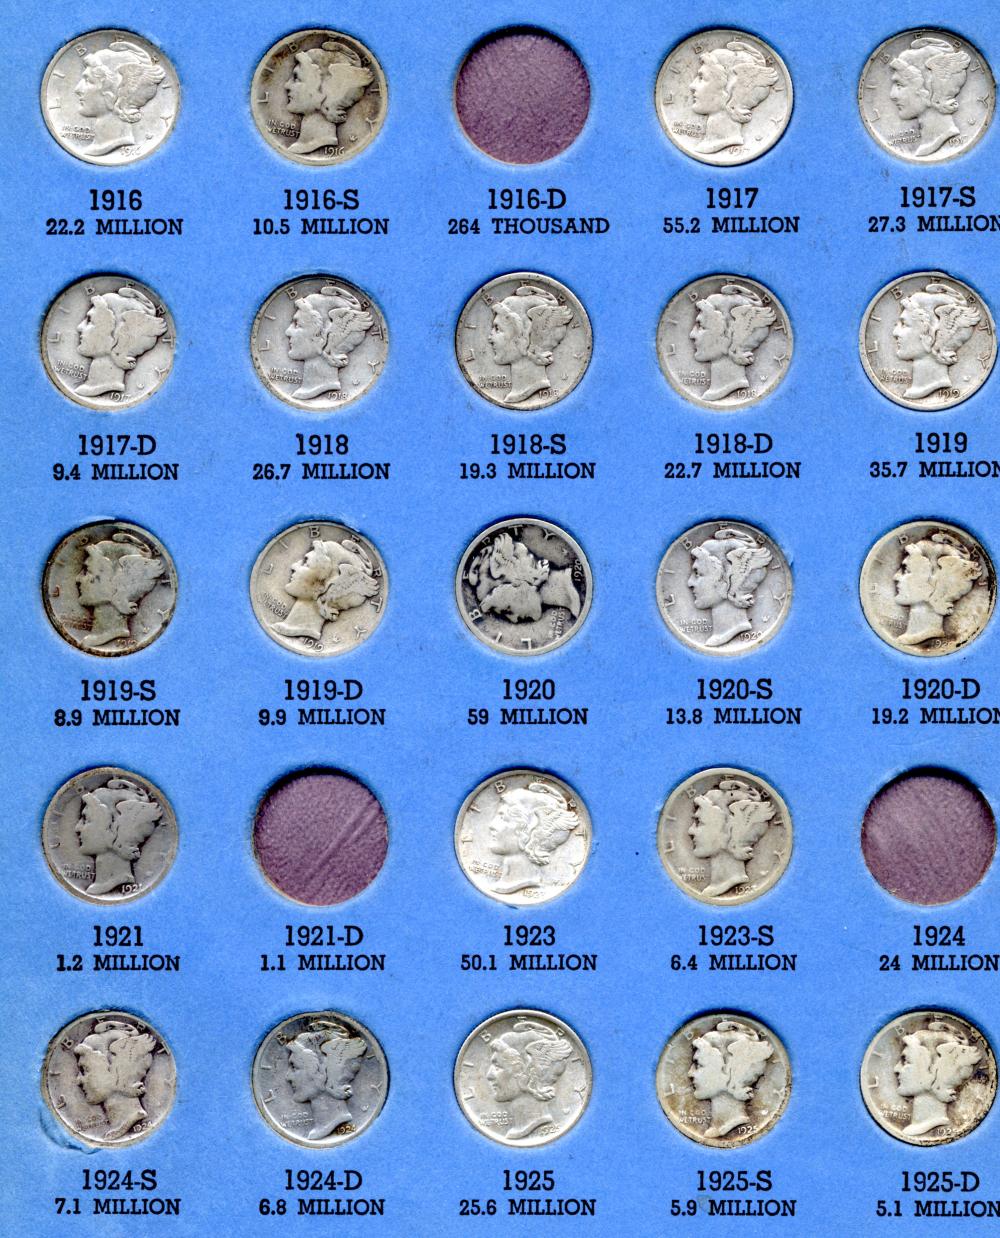 This is a page from my Mercury dime collector’s book. Look at how many of the dates I had filled in! As I drove to the the coin shop to get my collection appraised, I reflected on an impending life-changing decision: Might this be the day I finally can retire? What car would I buy?